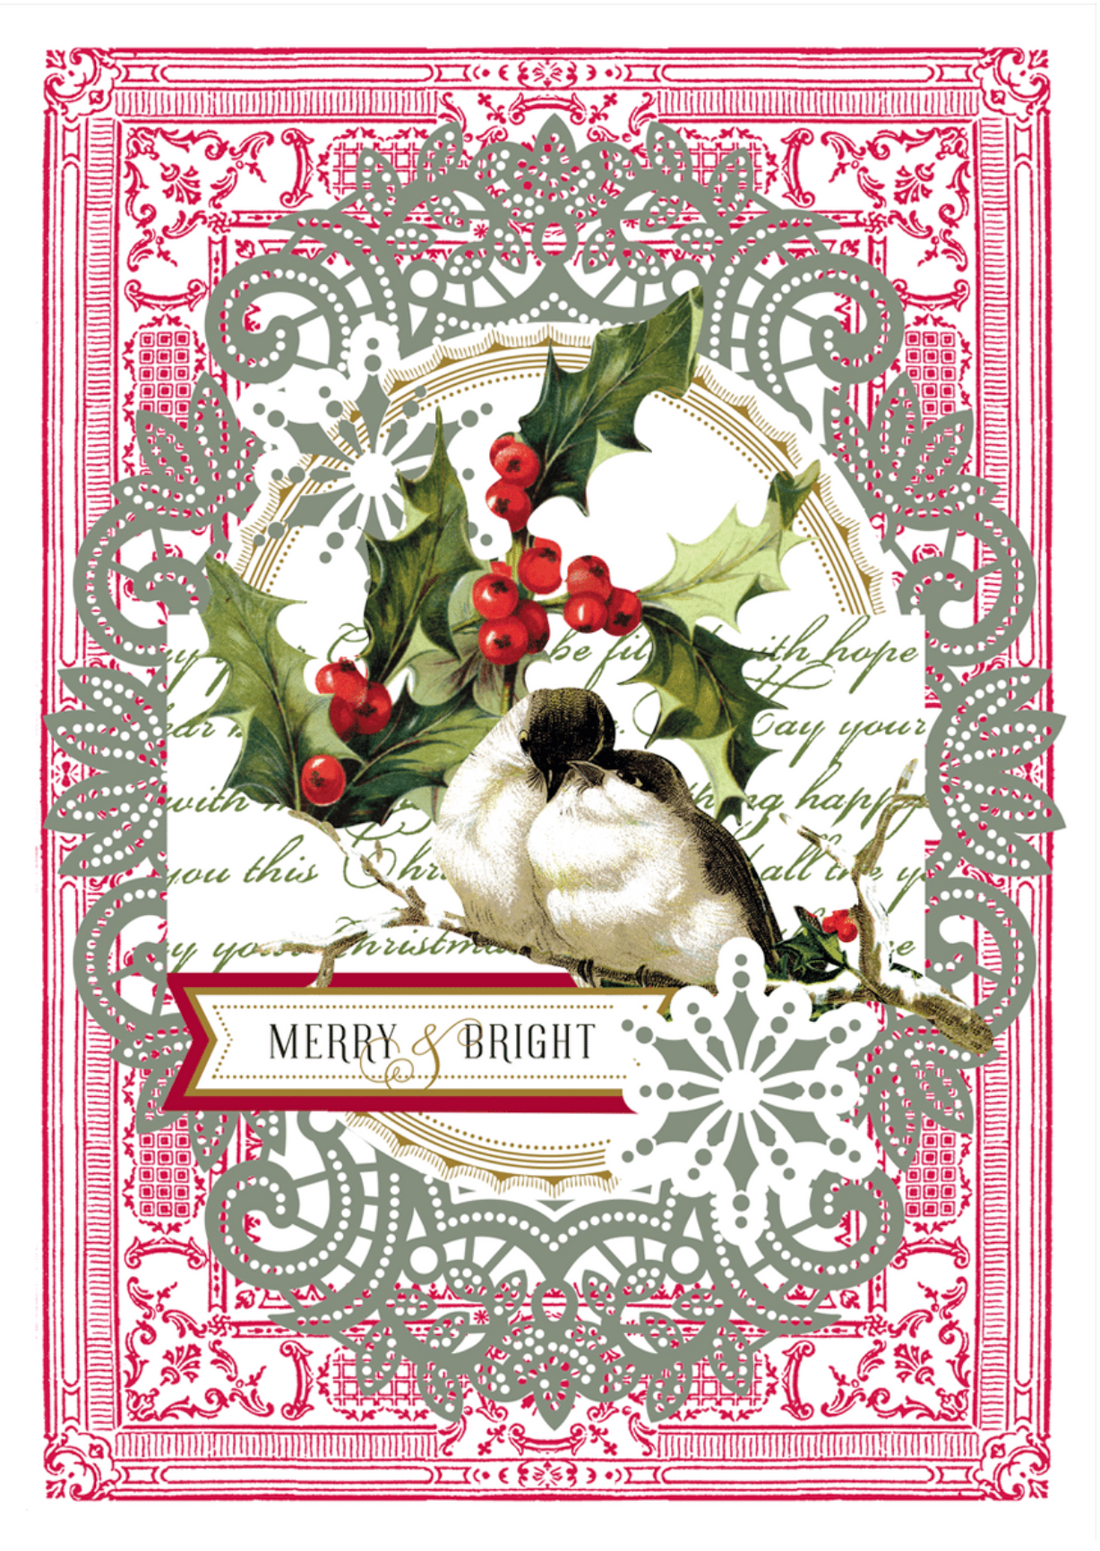 Birds and Holly Handmade Boxed Holiday Cards - Set of 10